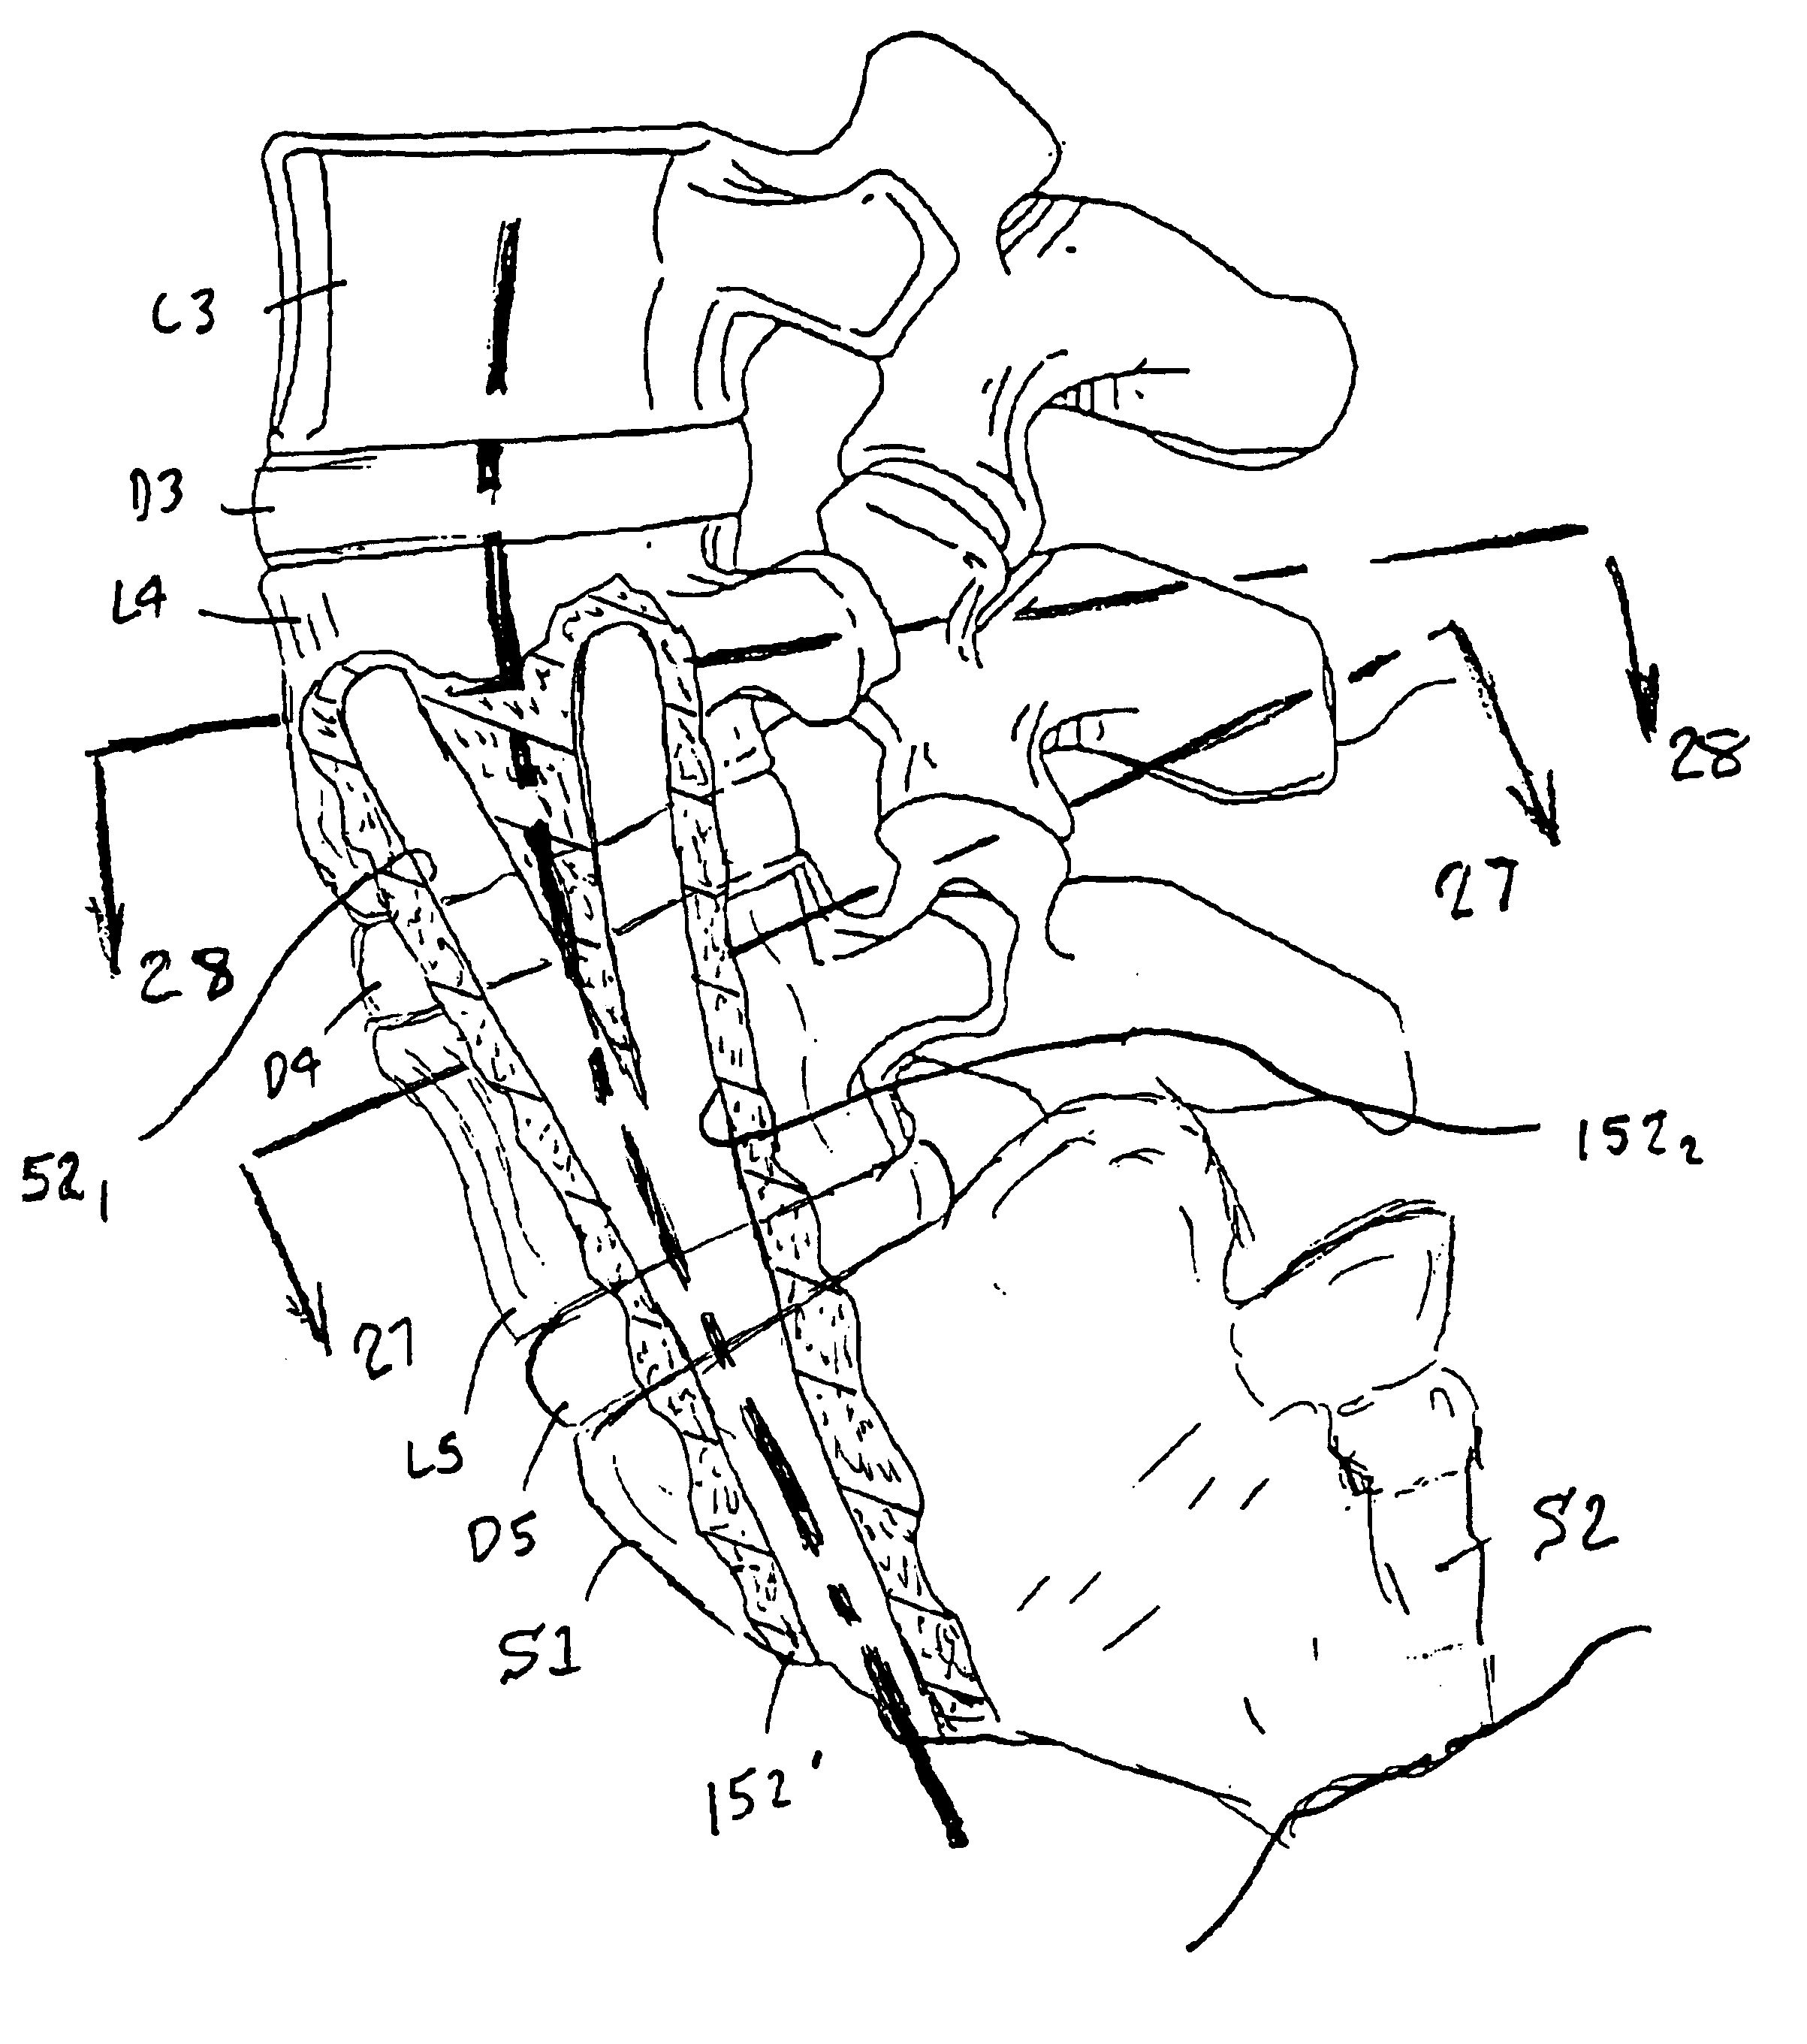 Methods and apparatus for forming curved axial bores through spinal vertebrae